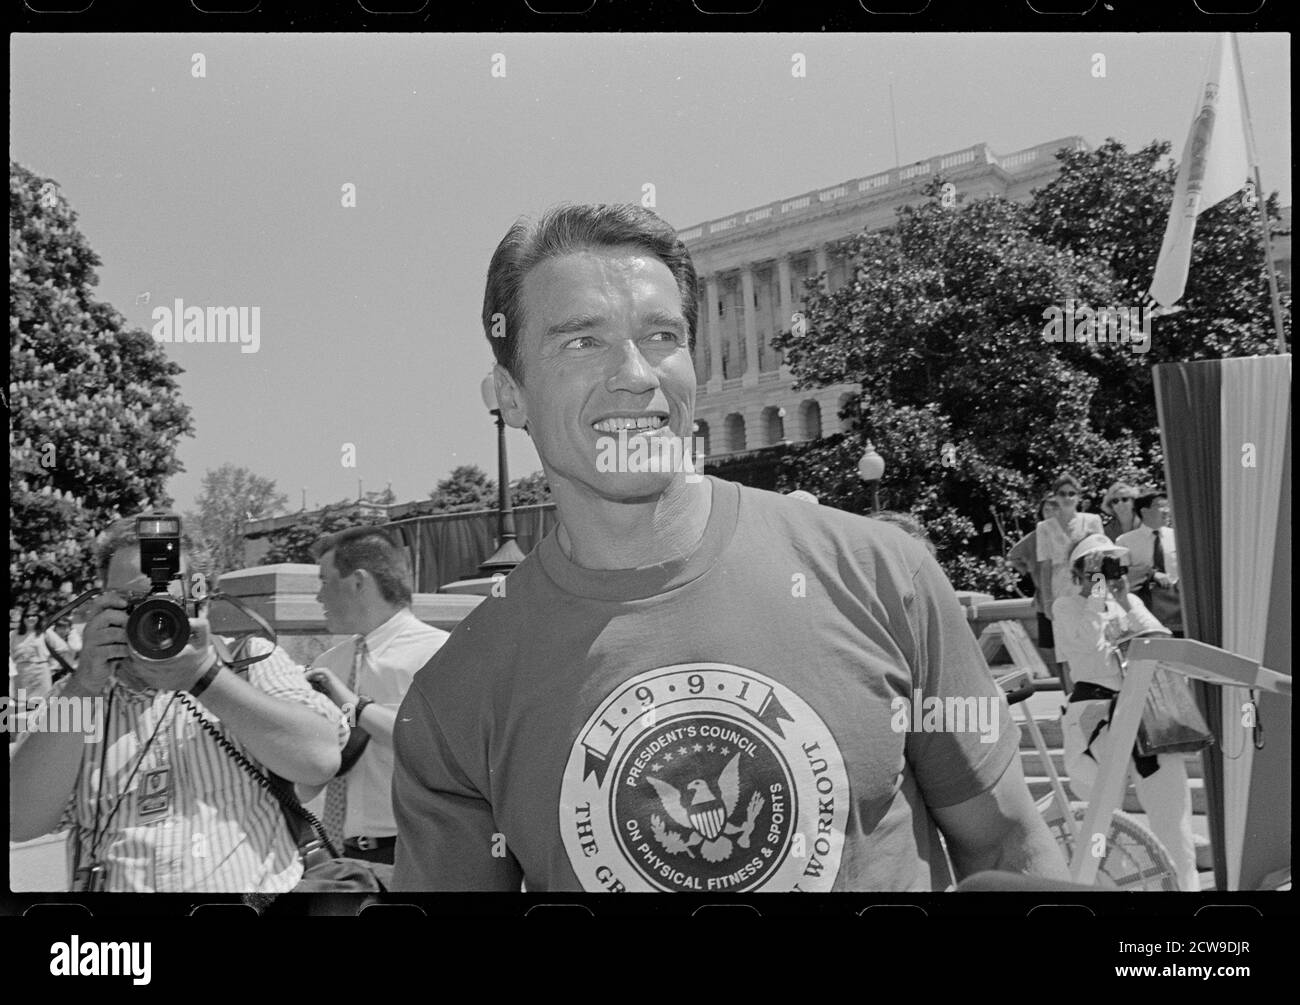 Arnold Schwarzenegger pumping up arms in his retro UAB t-shirt.